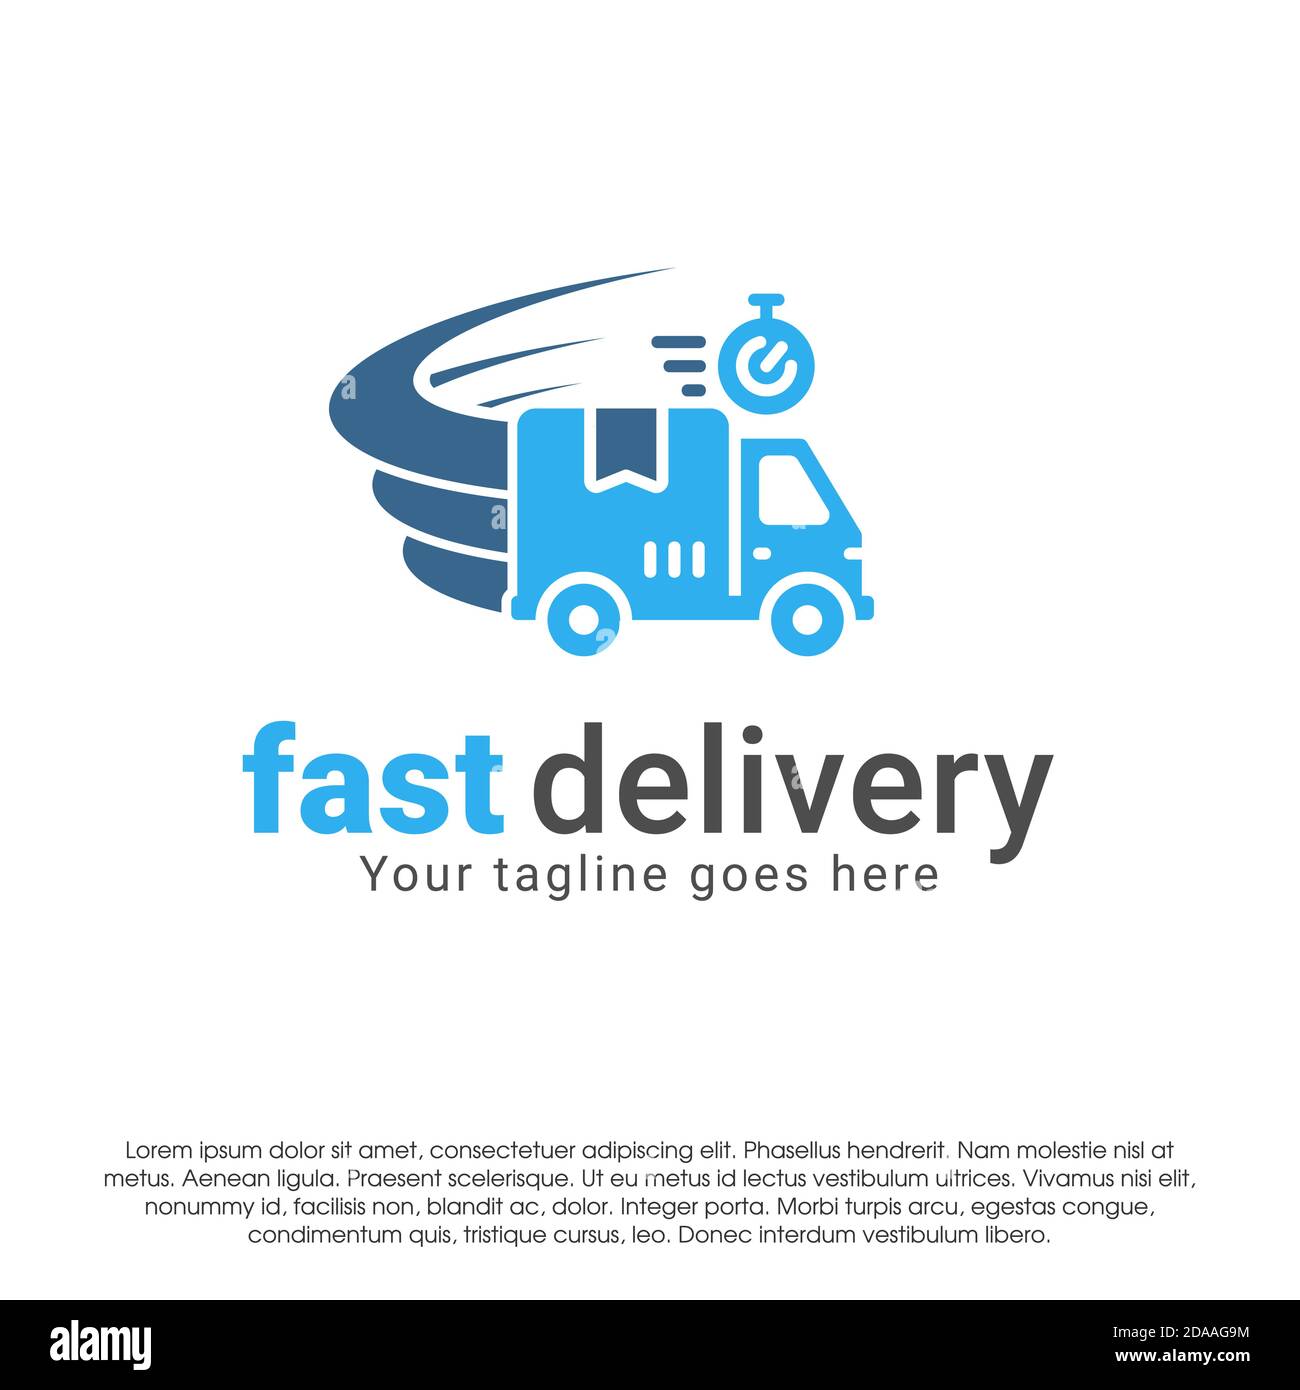 Delivery logo icon design concept template. Fast delivery vector illustration isolated on white background. Truck in motion logo design. Car logo Stock Vector